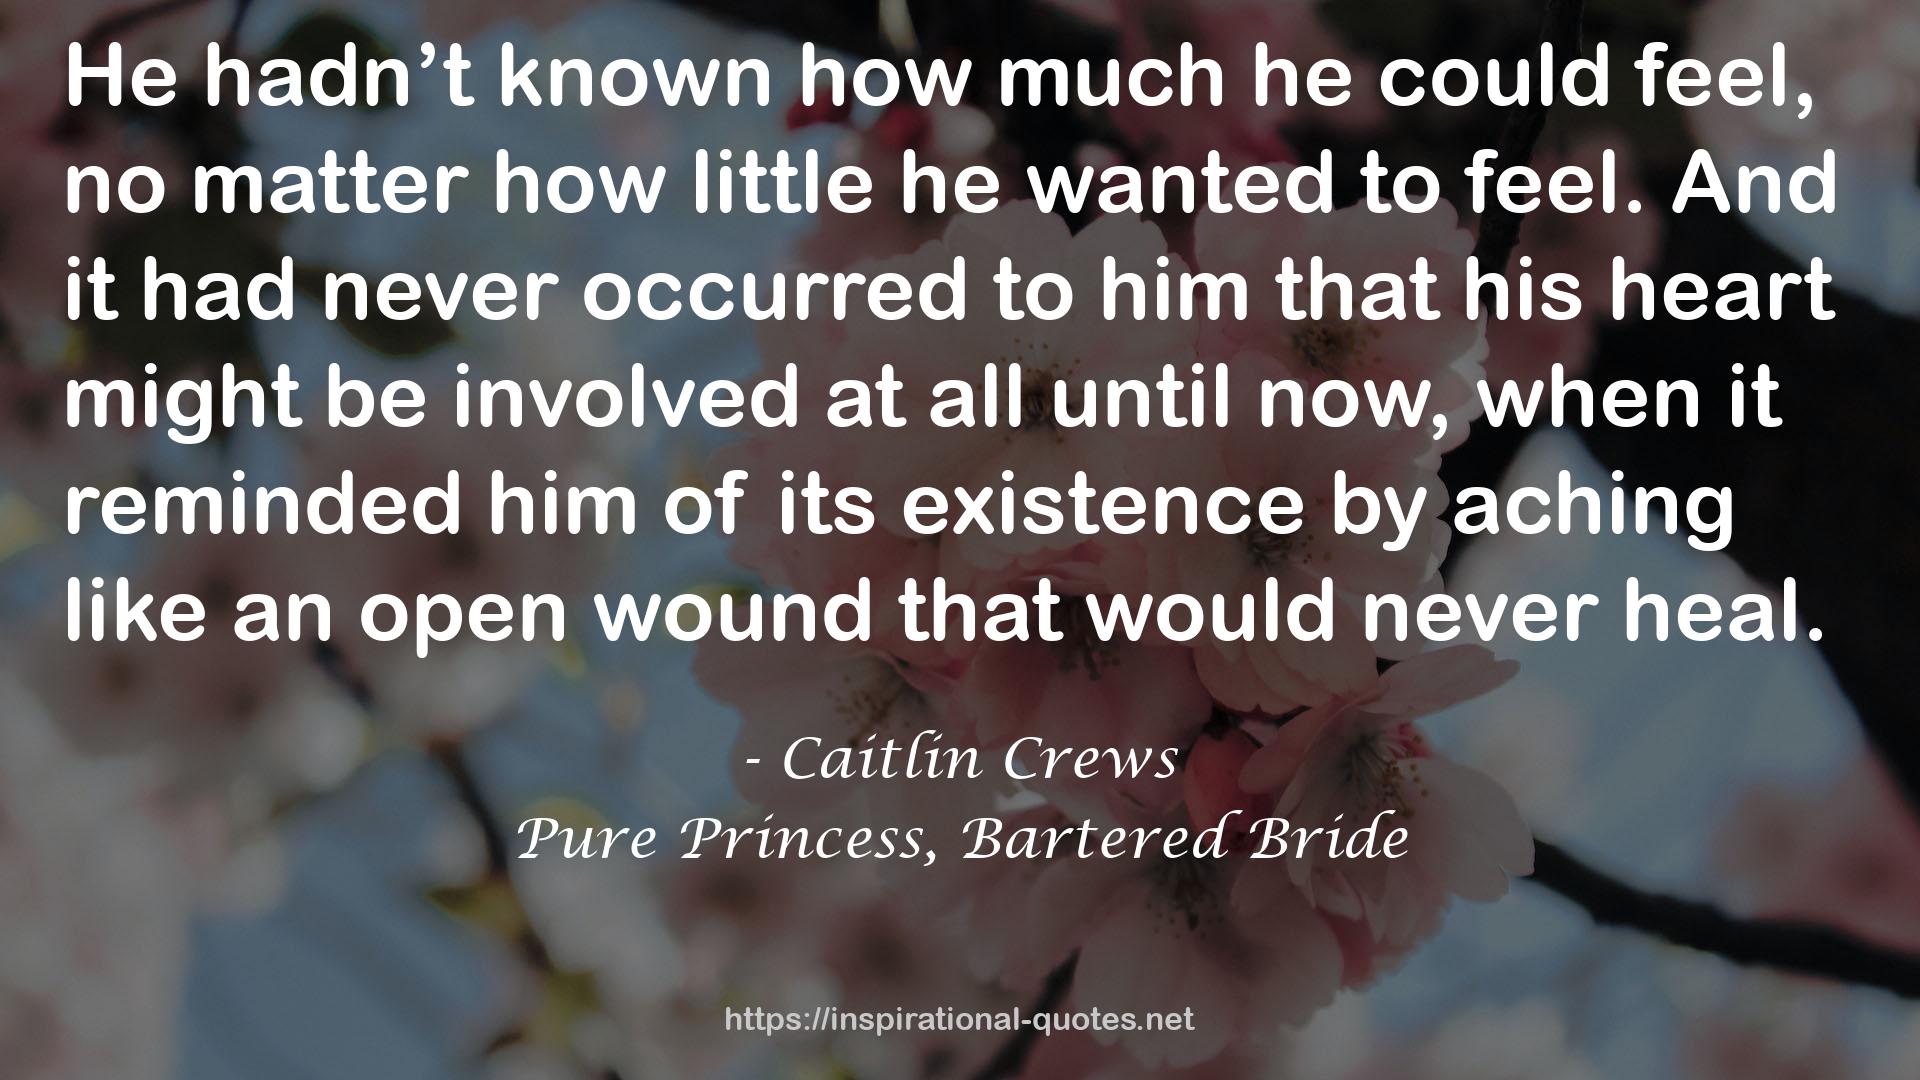 Pure Princess, Bartered Bride QUOTES